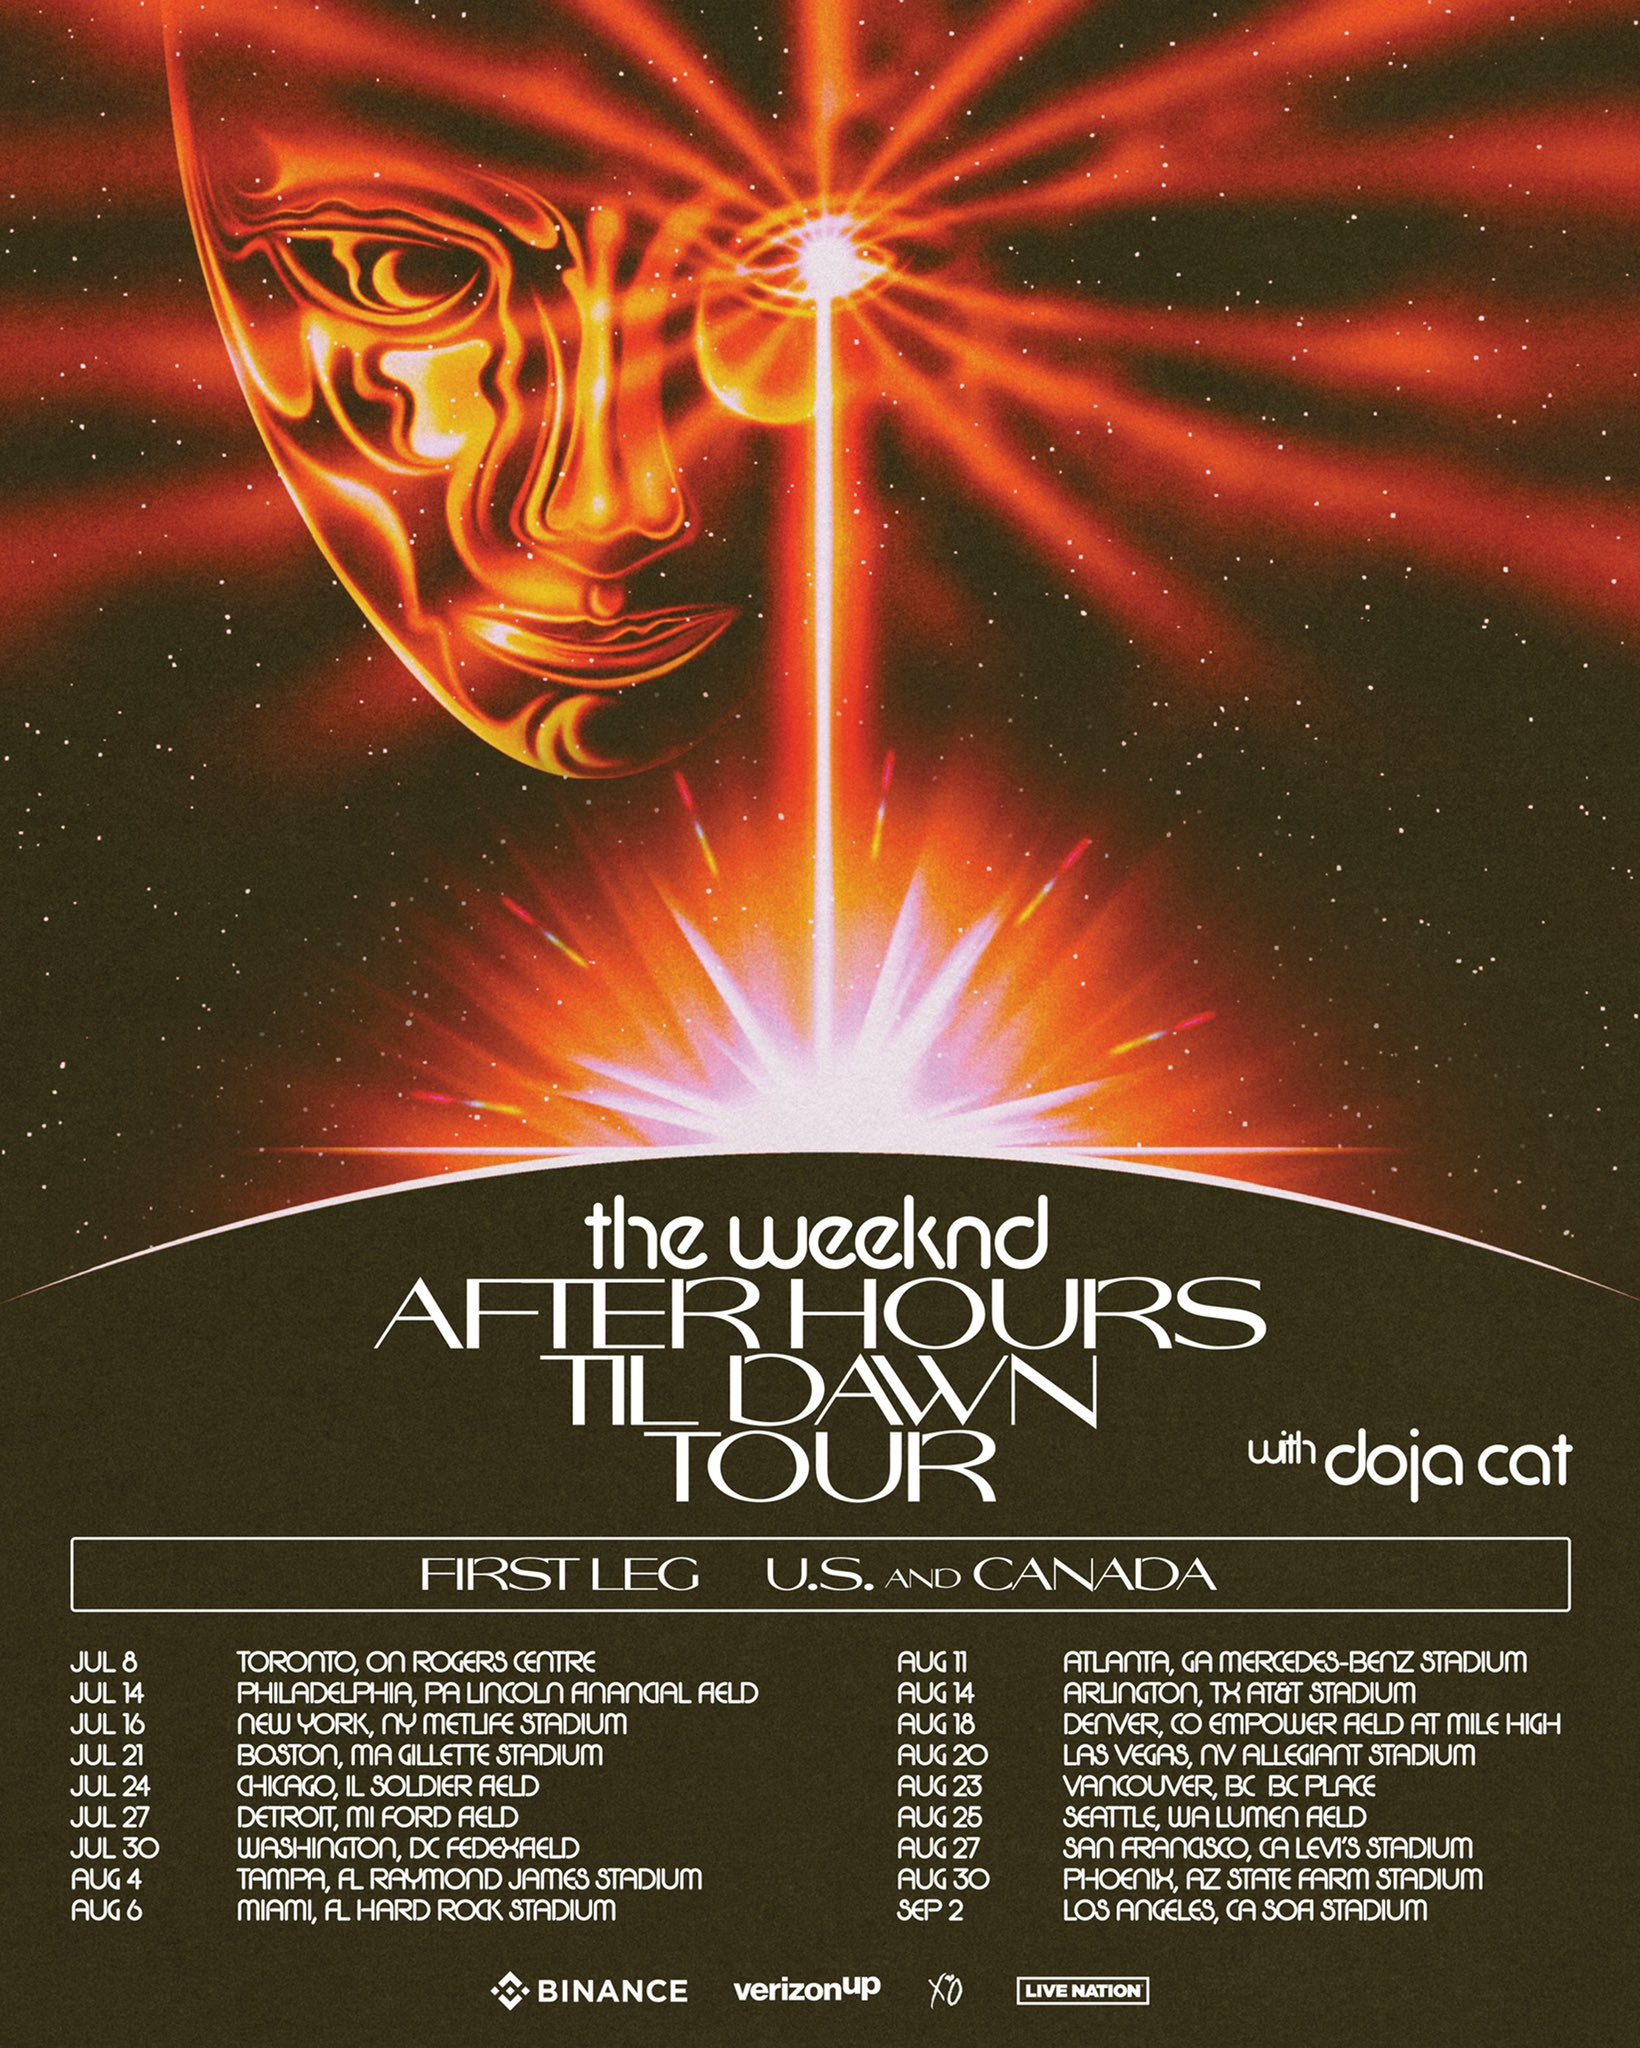 Get Ready For The Weeknd "After Hours Till Dawn" Tour Featuring Doja